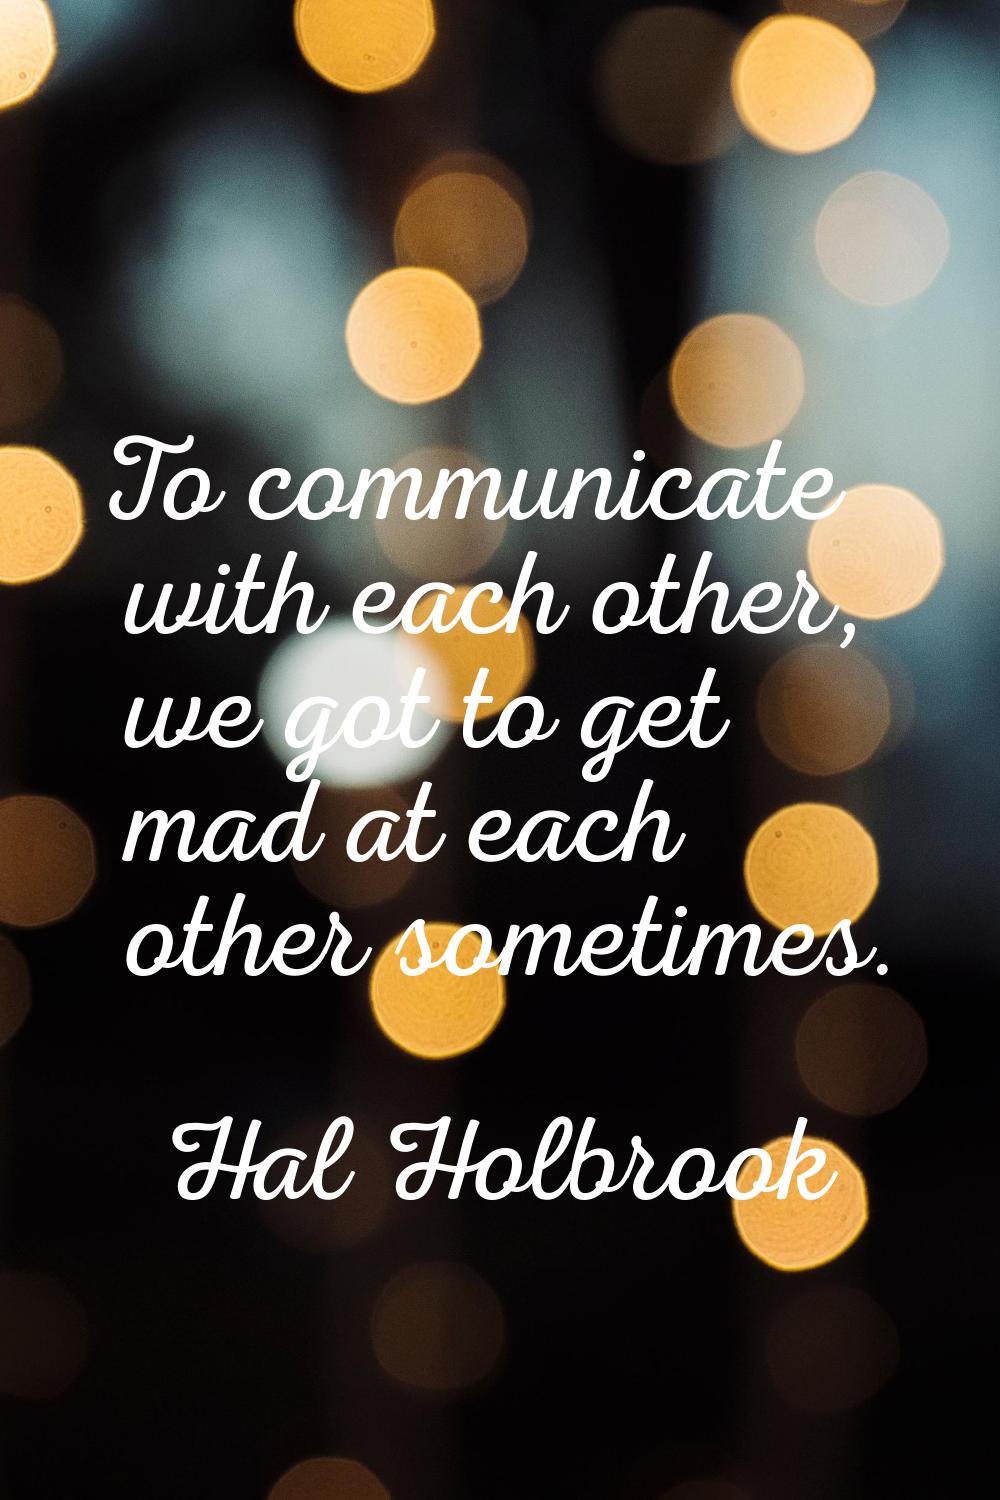 To communicate with each other, we got to get mad at each other sometimes.